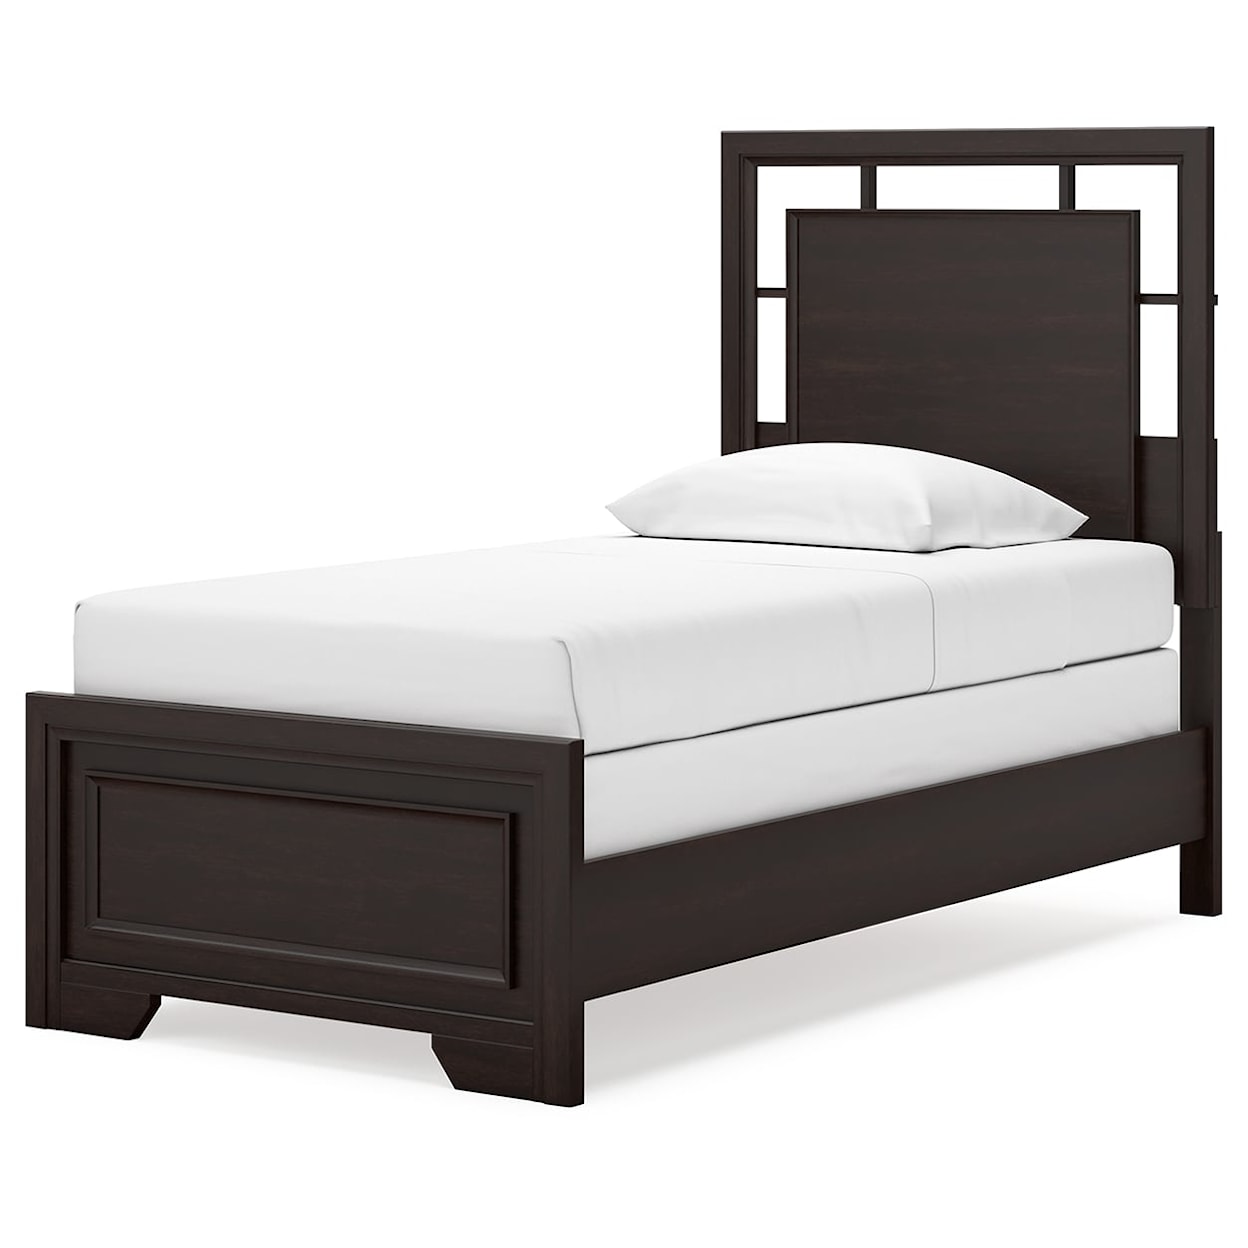 StyleLine Covetown Twin Panel Bed